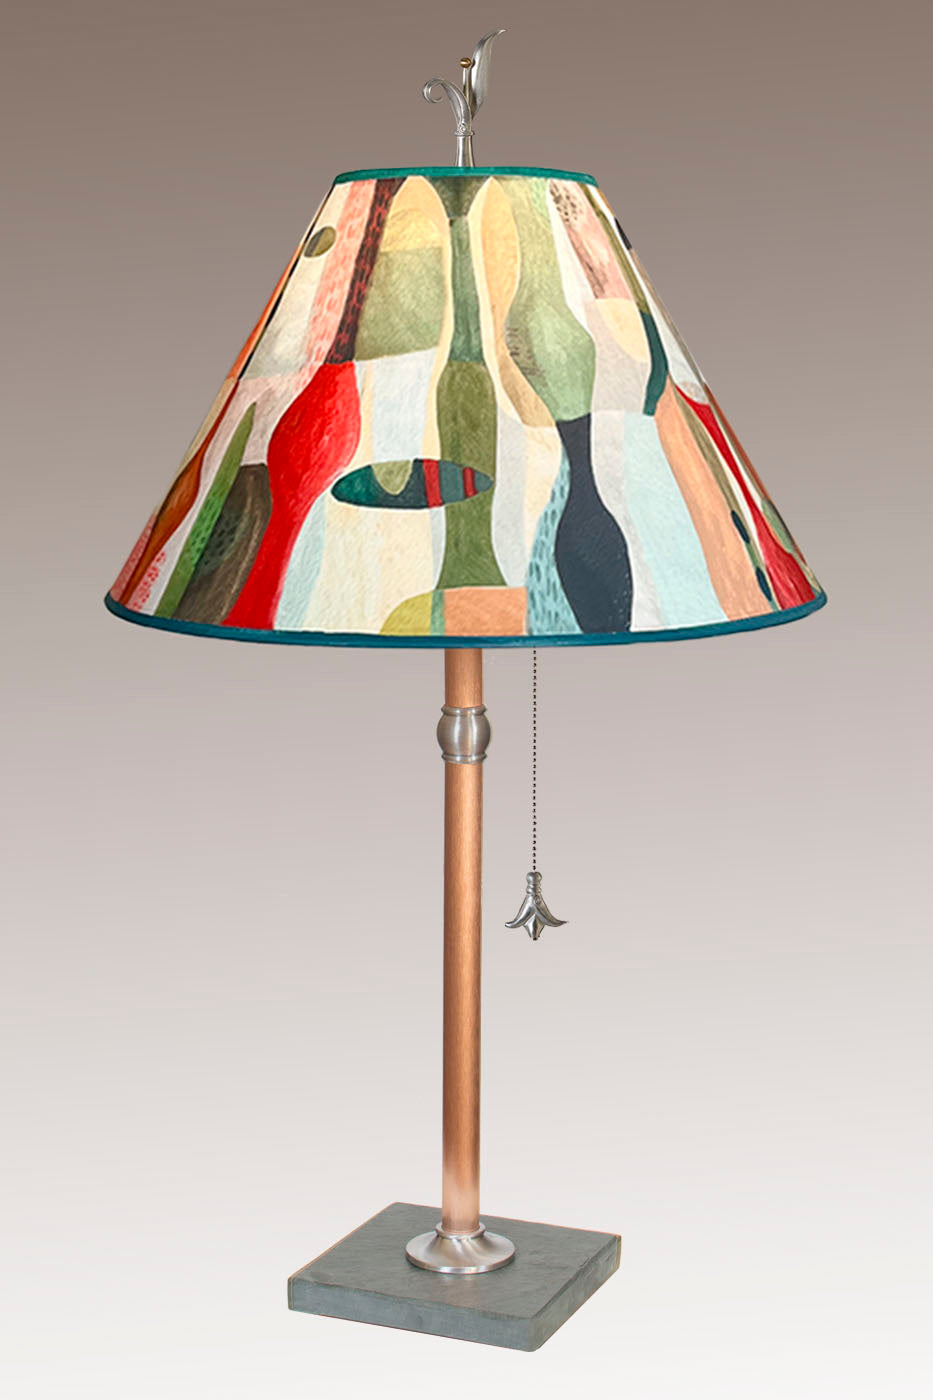 Janna Ugone & Co Table Lamp Copper Table Lamp with Medium Conical Shade in Riviera in Poppy